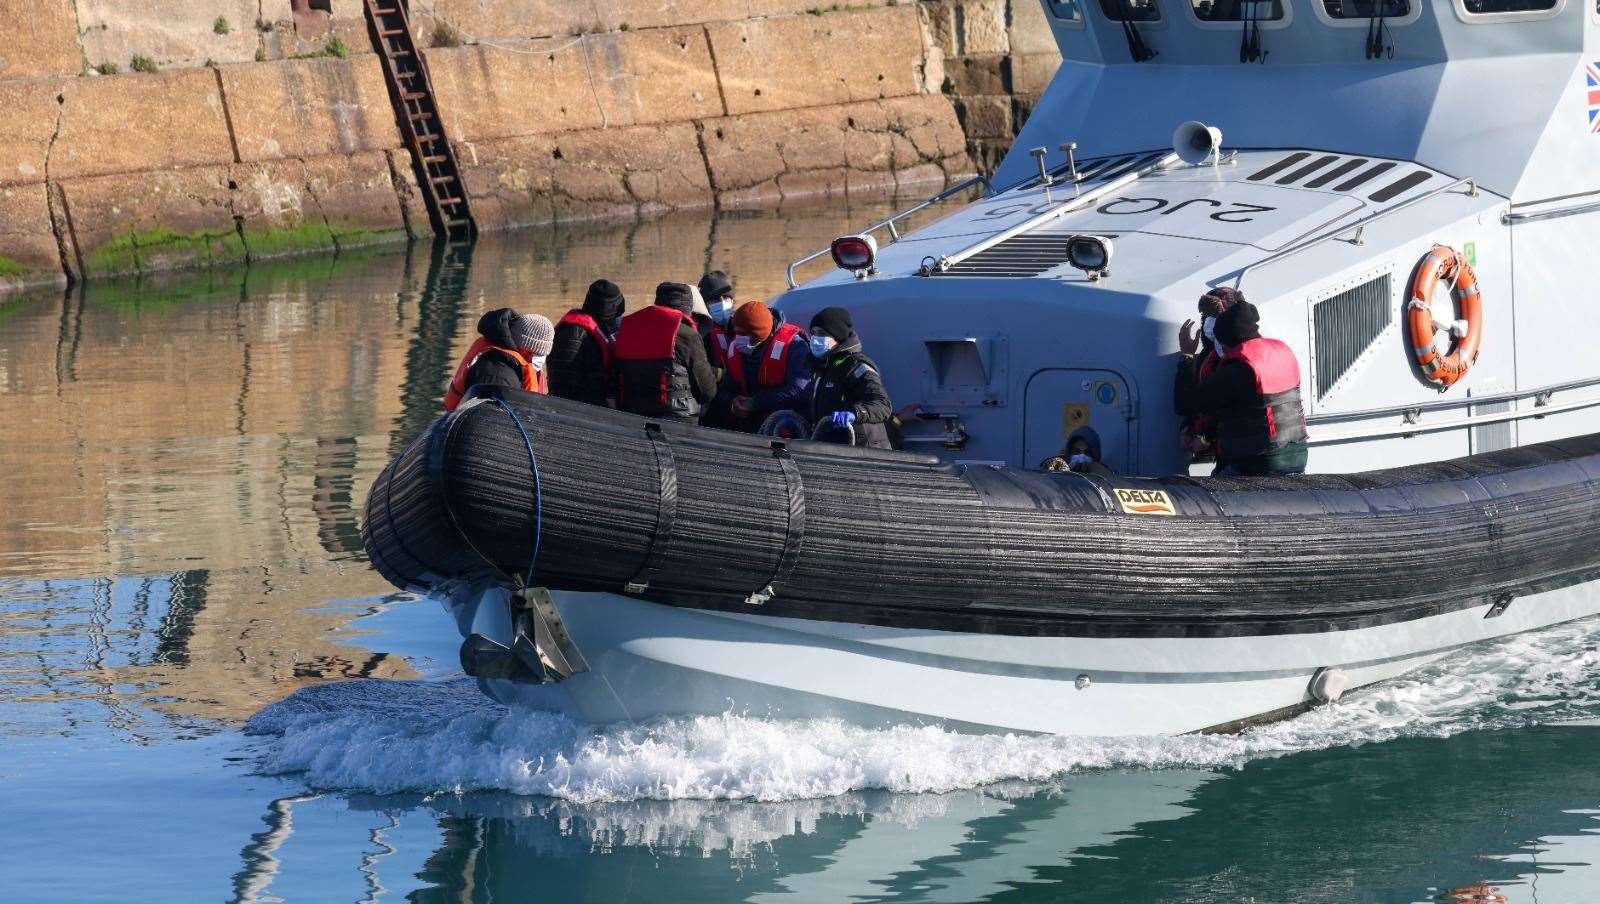 Thousands of asylum seekers have crossed the Channel in the last year. Picture: UKNIP